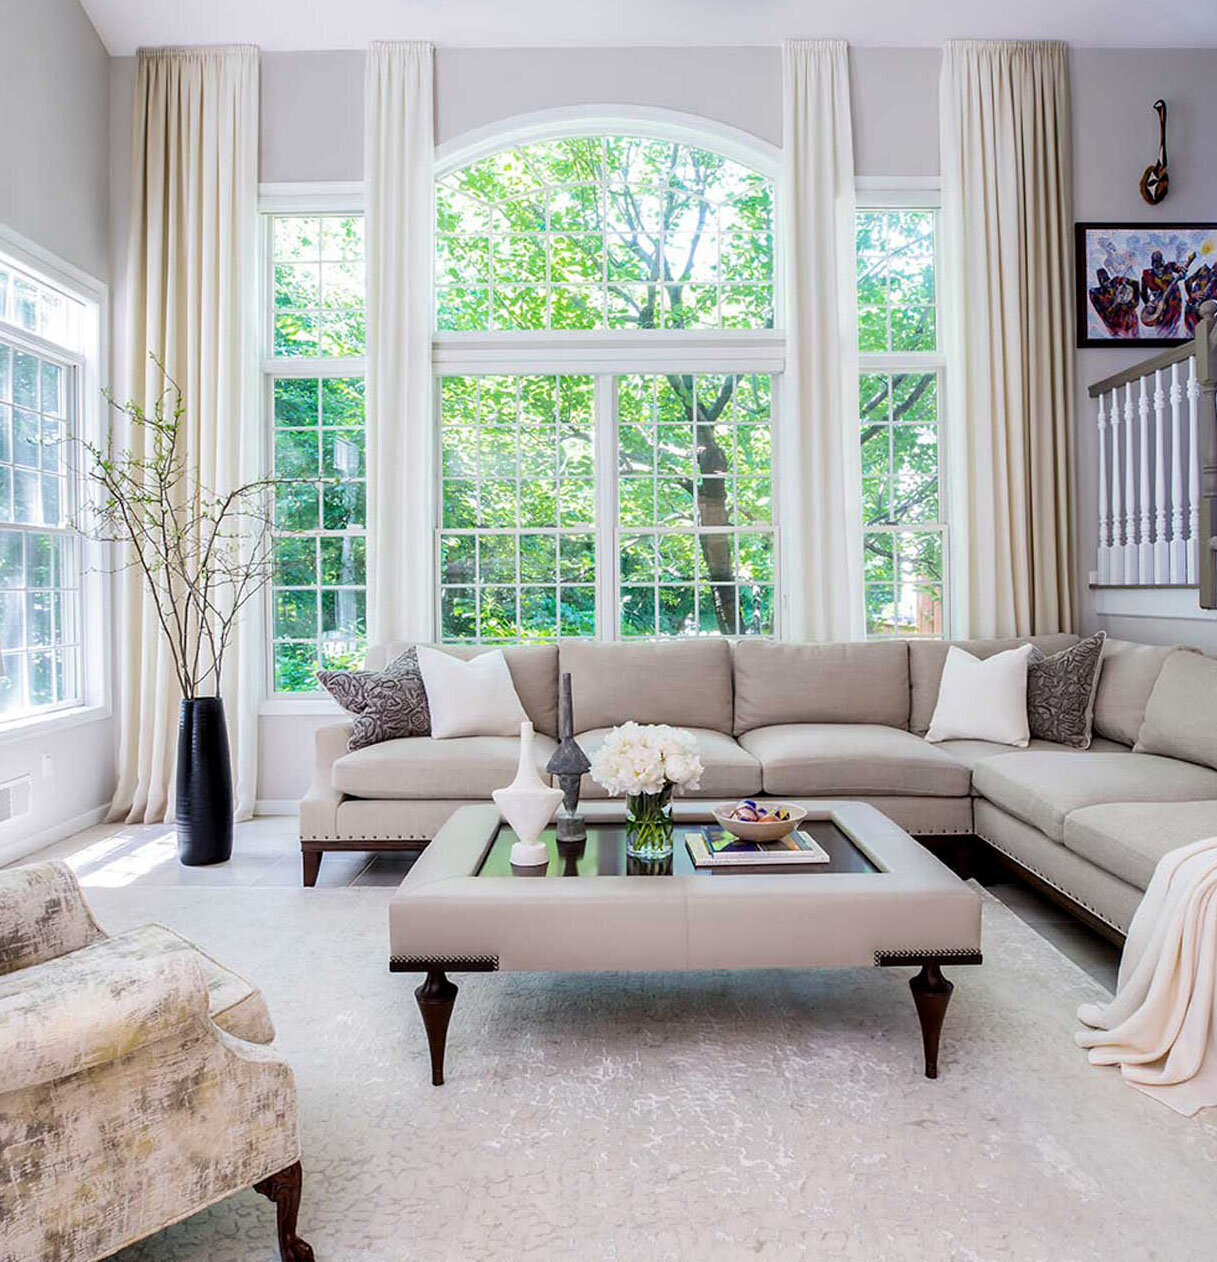 35-claudia-giselle-interior-design-new-jersey-usa-living-room 